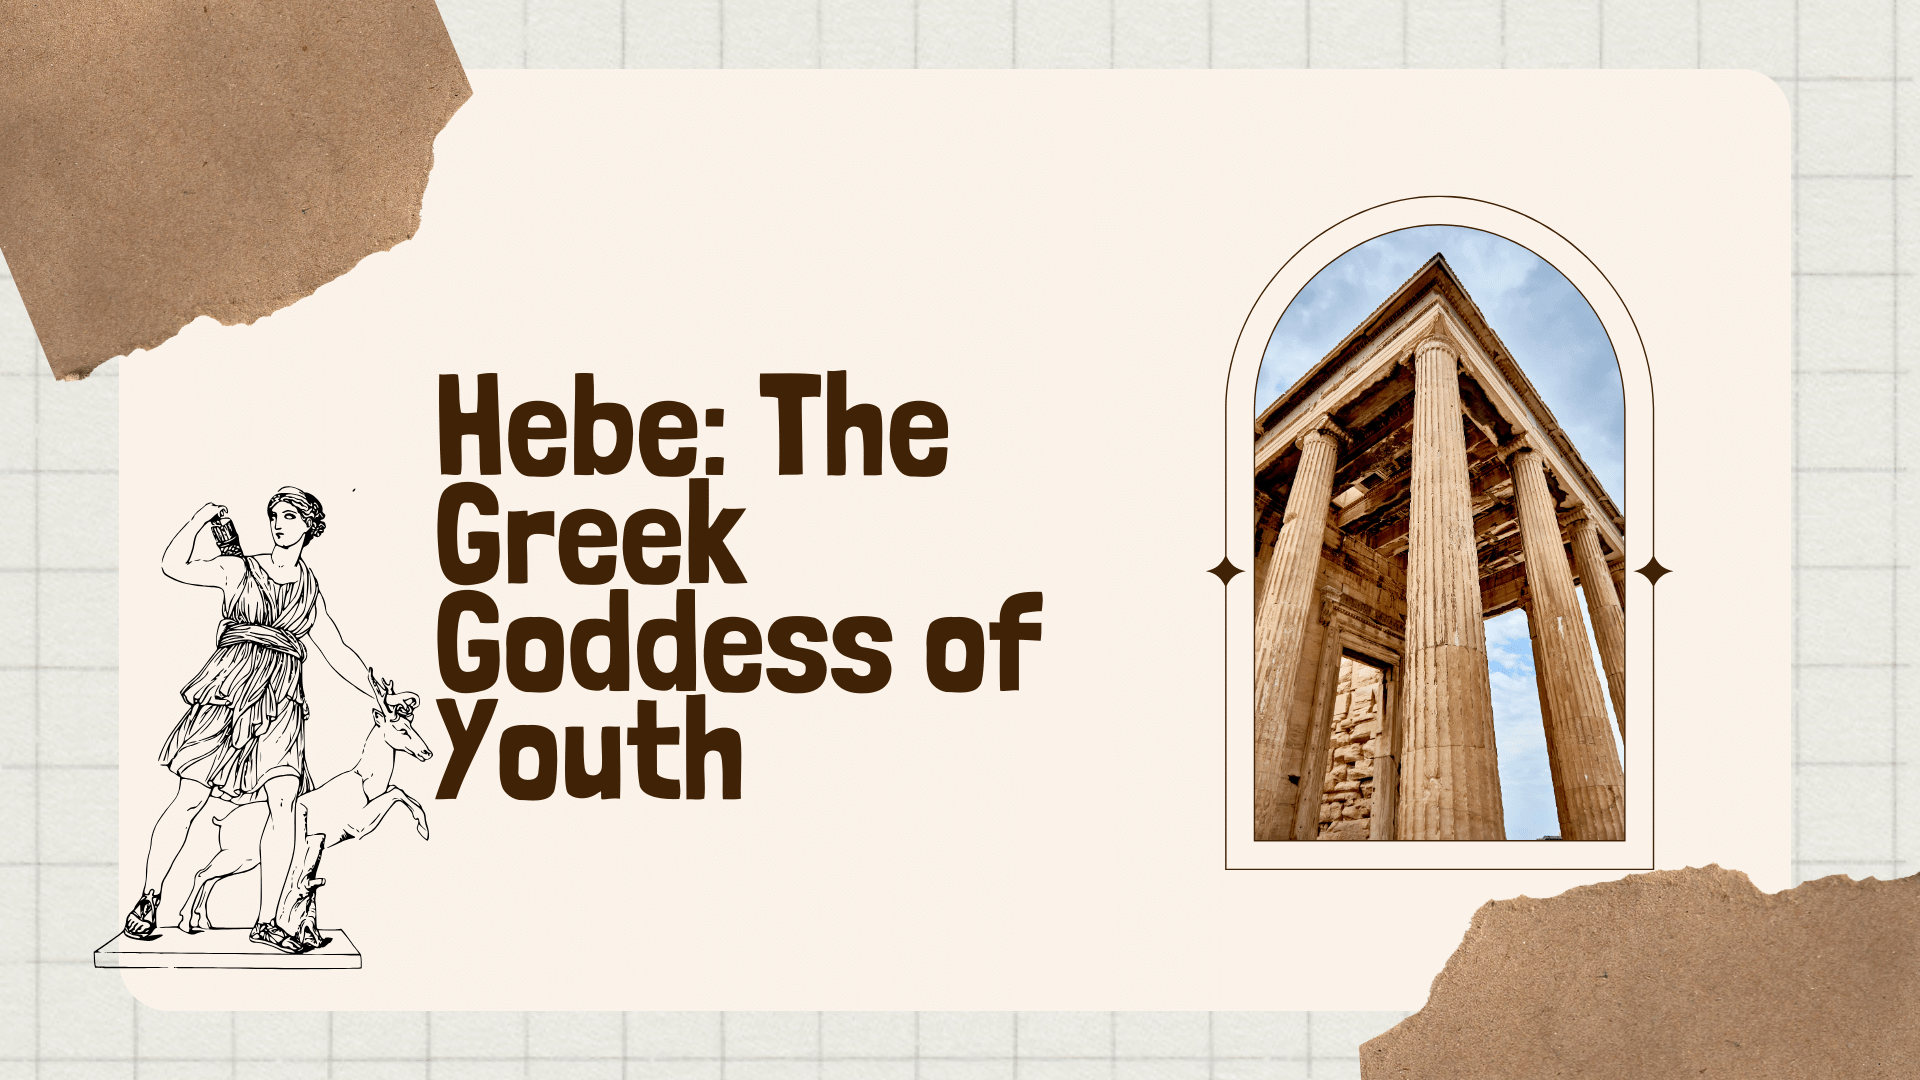 Hebe: The Greek Goddess of Youth